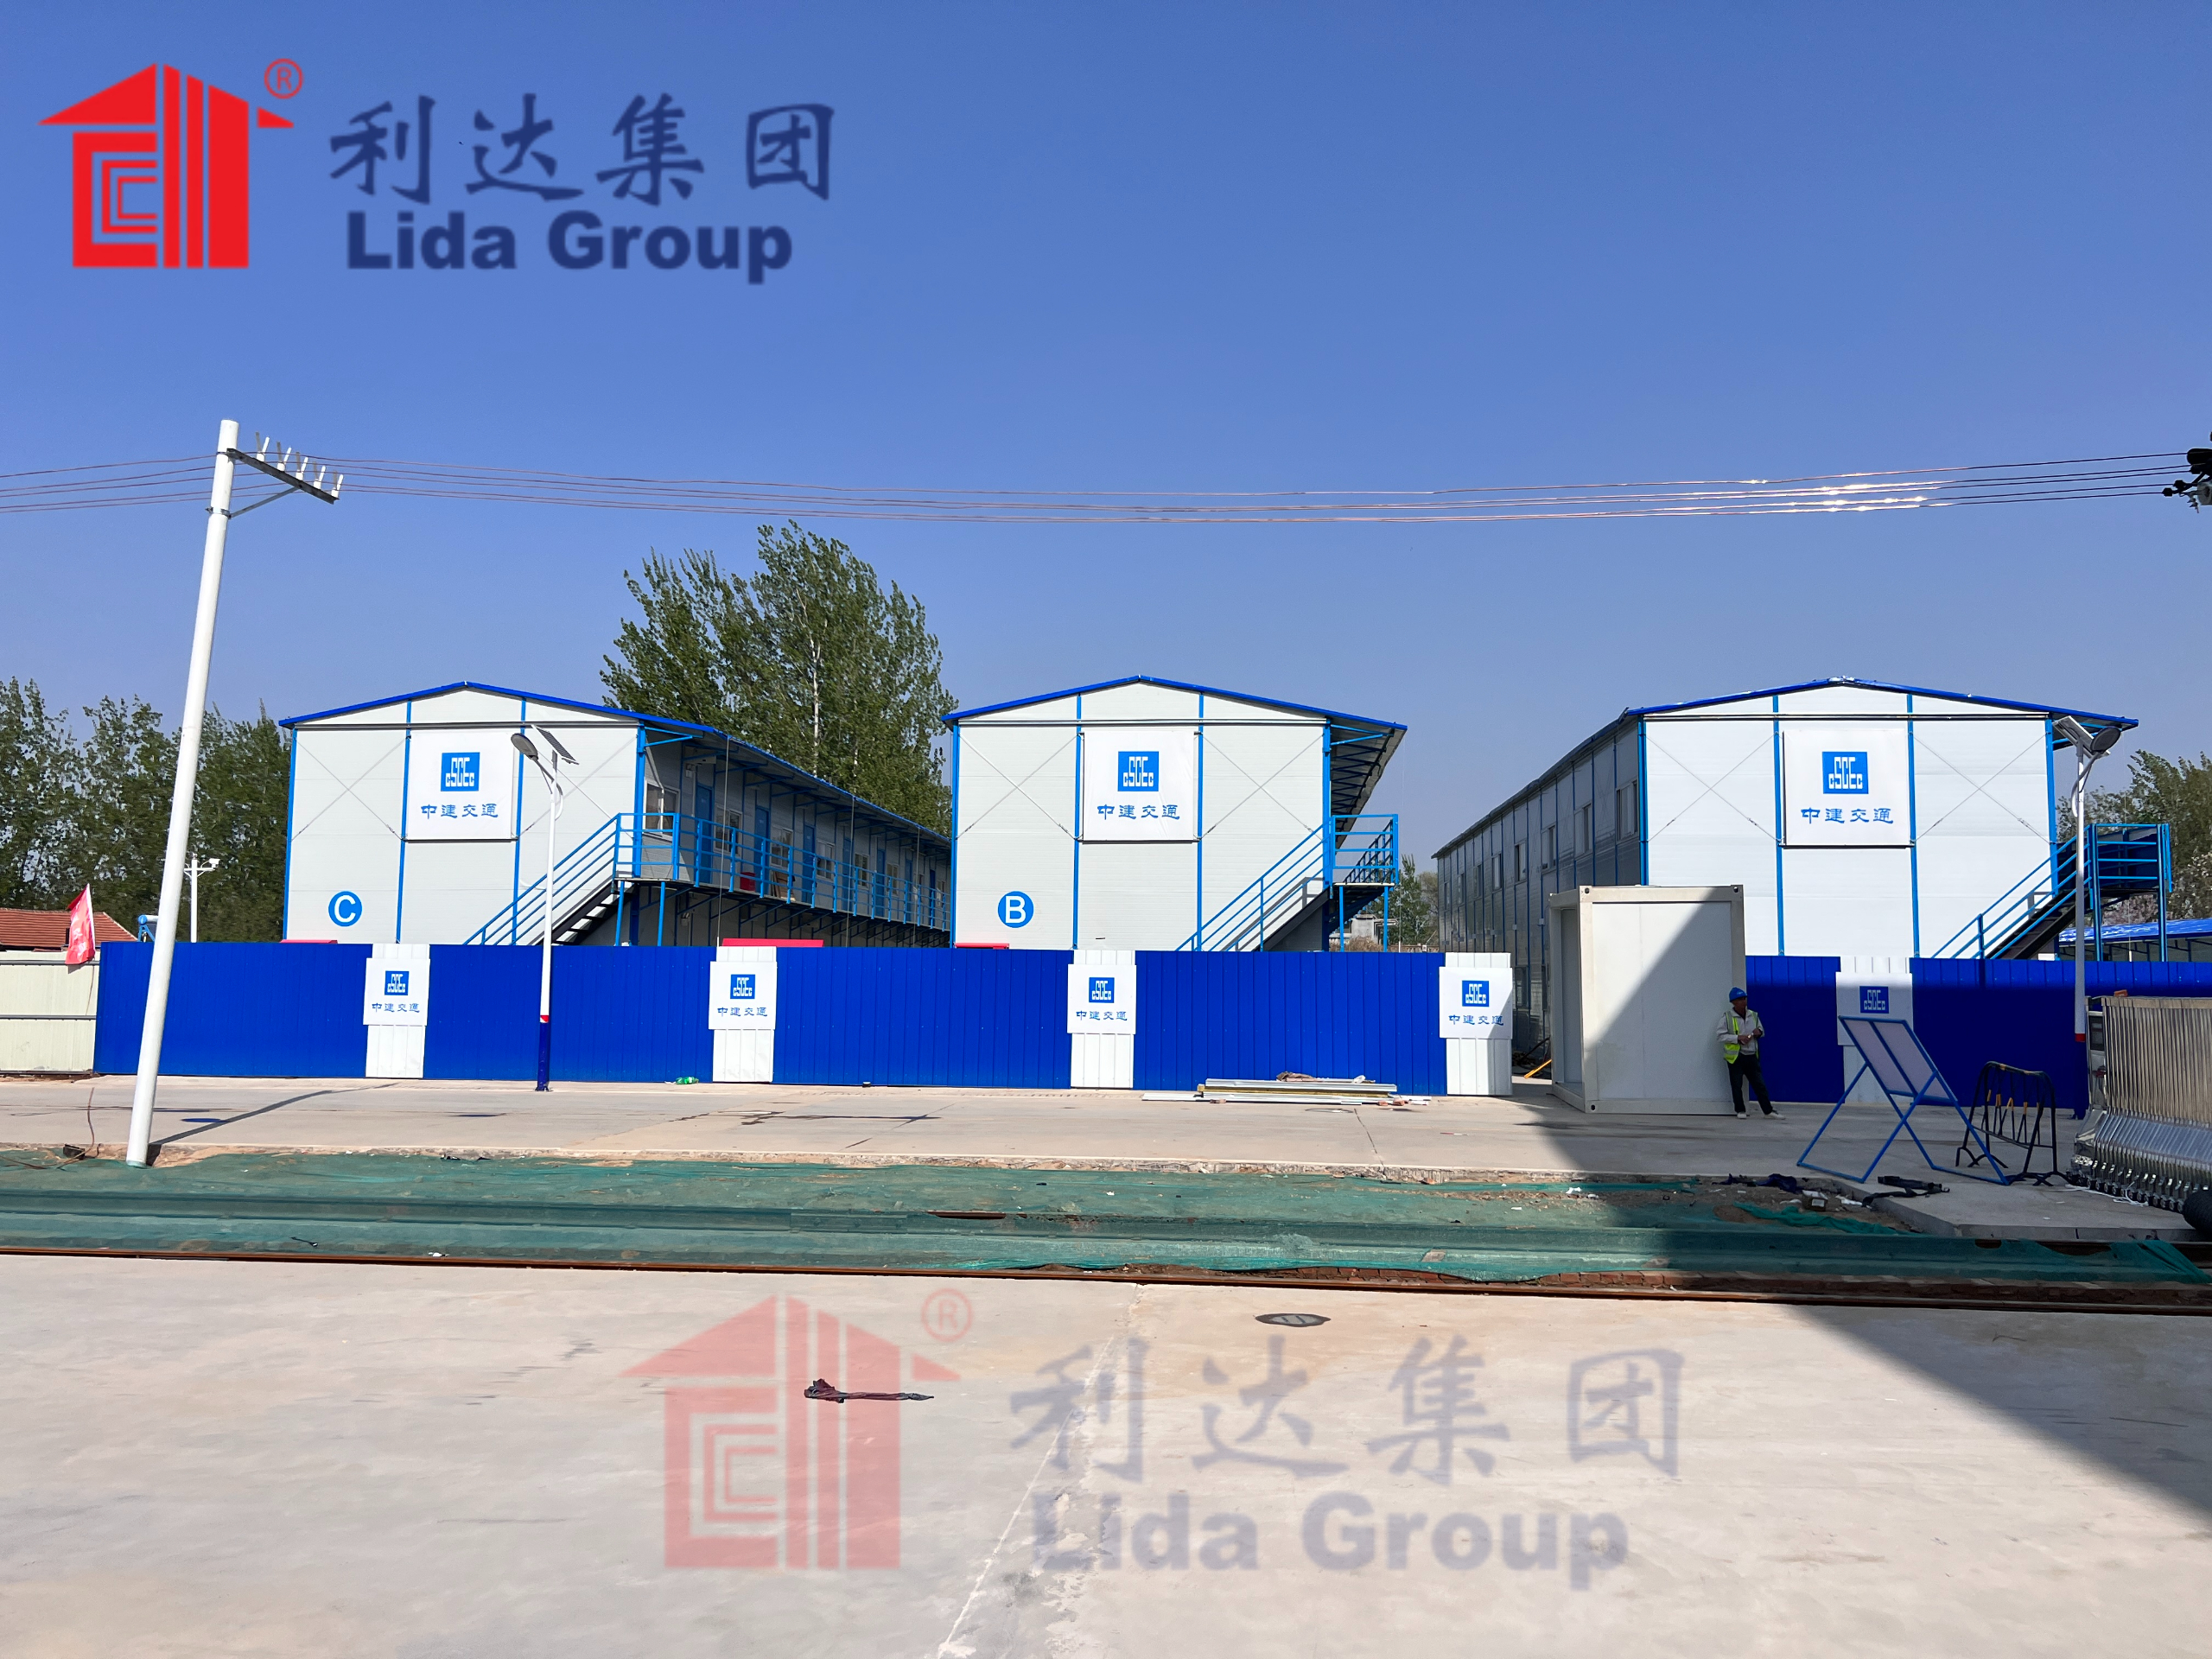 Contractors partner with Lida Group to mass produce modular integrated building components compatible with their industrialized prefab processes for deploying composite panel transitional shelters at scale.